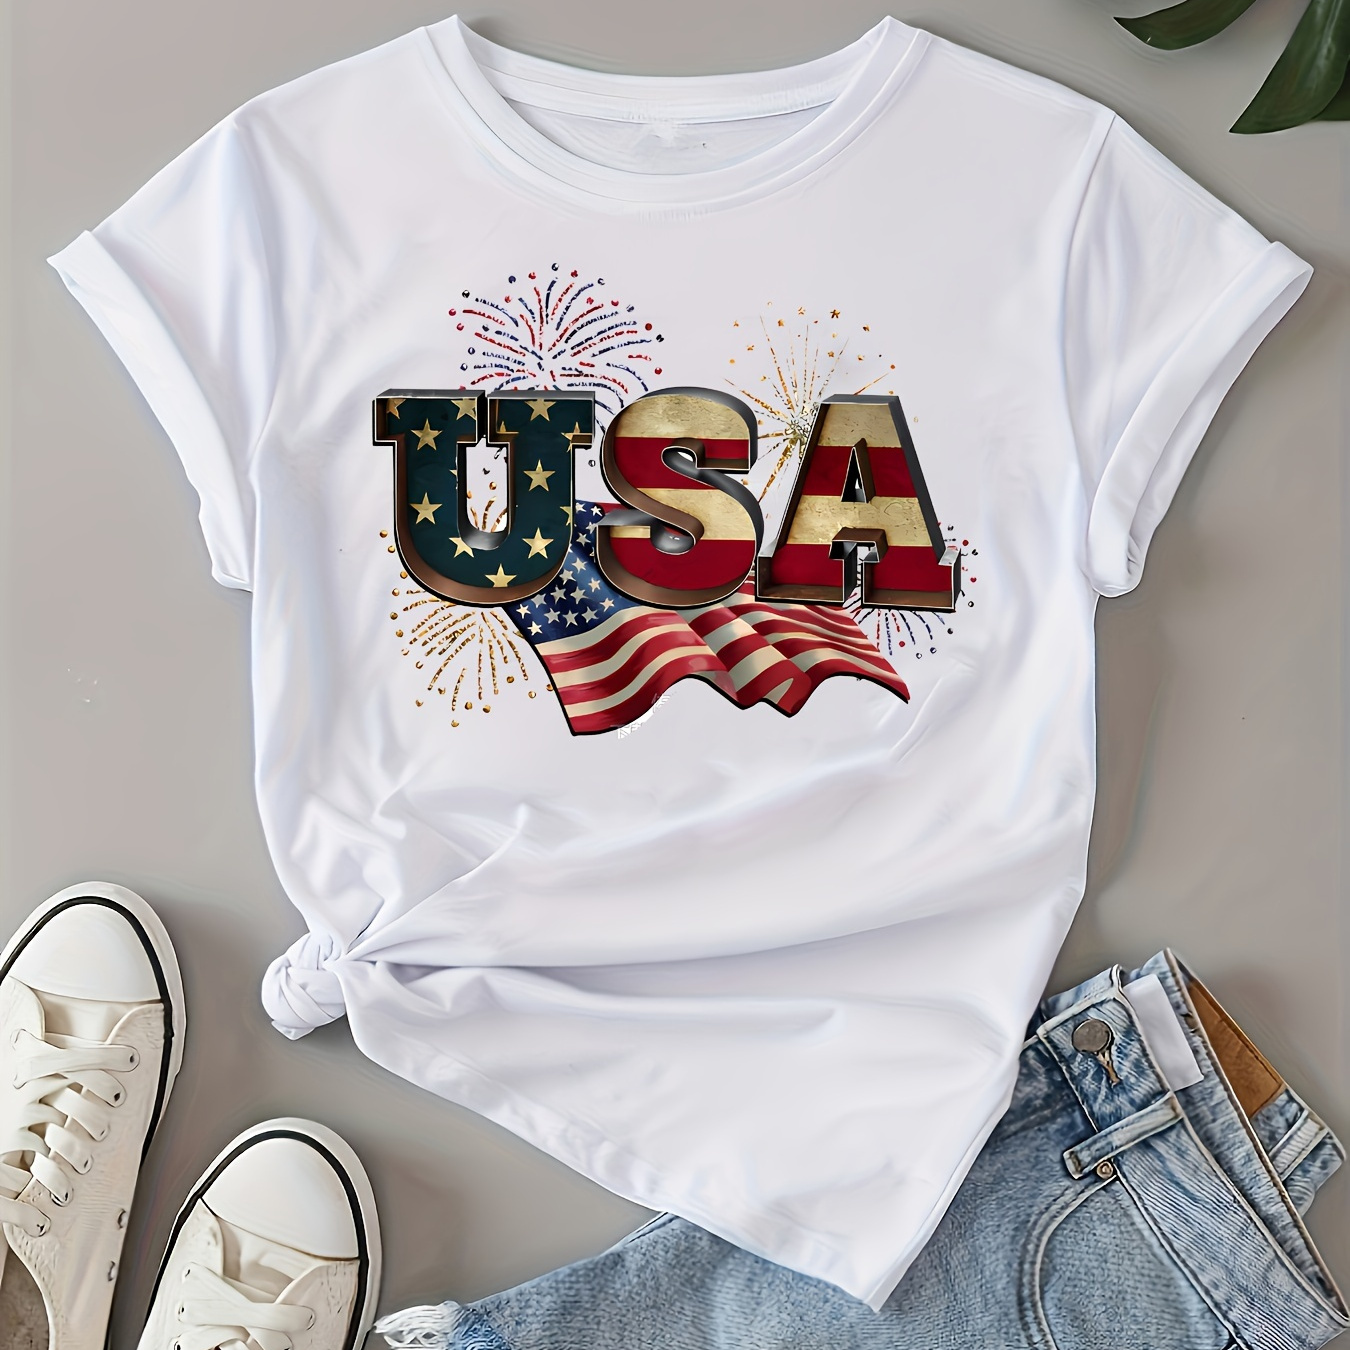 

Usa & Flag Print Crew Neck T-shirt, Casual Short Sleeve T-shirt For Spring & Summer, Women's Clothing